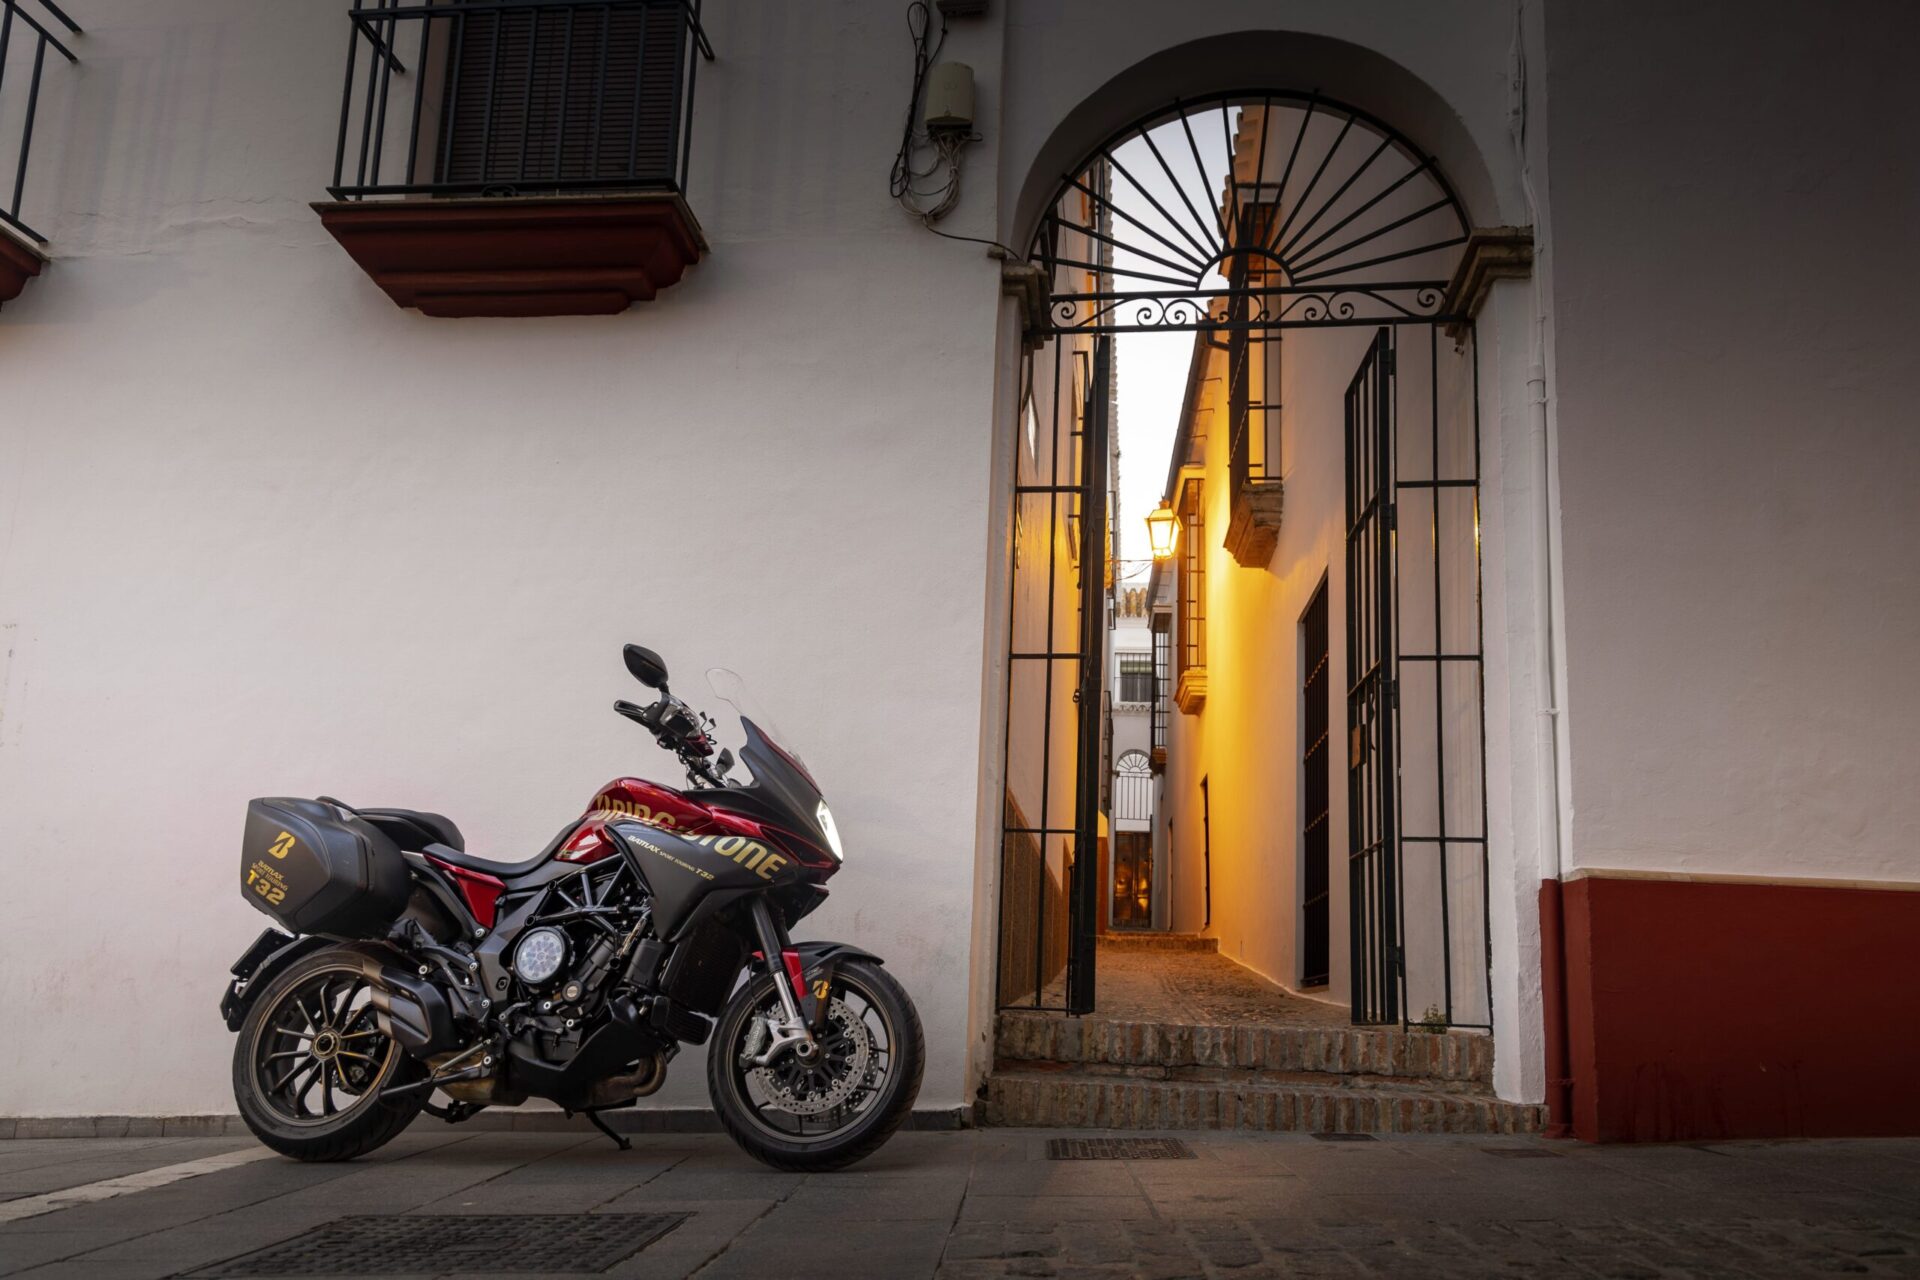 Spanish house with motorcycle